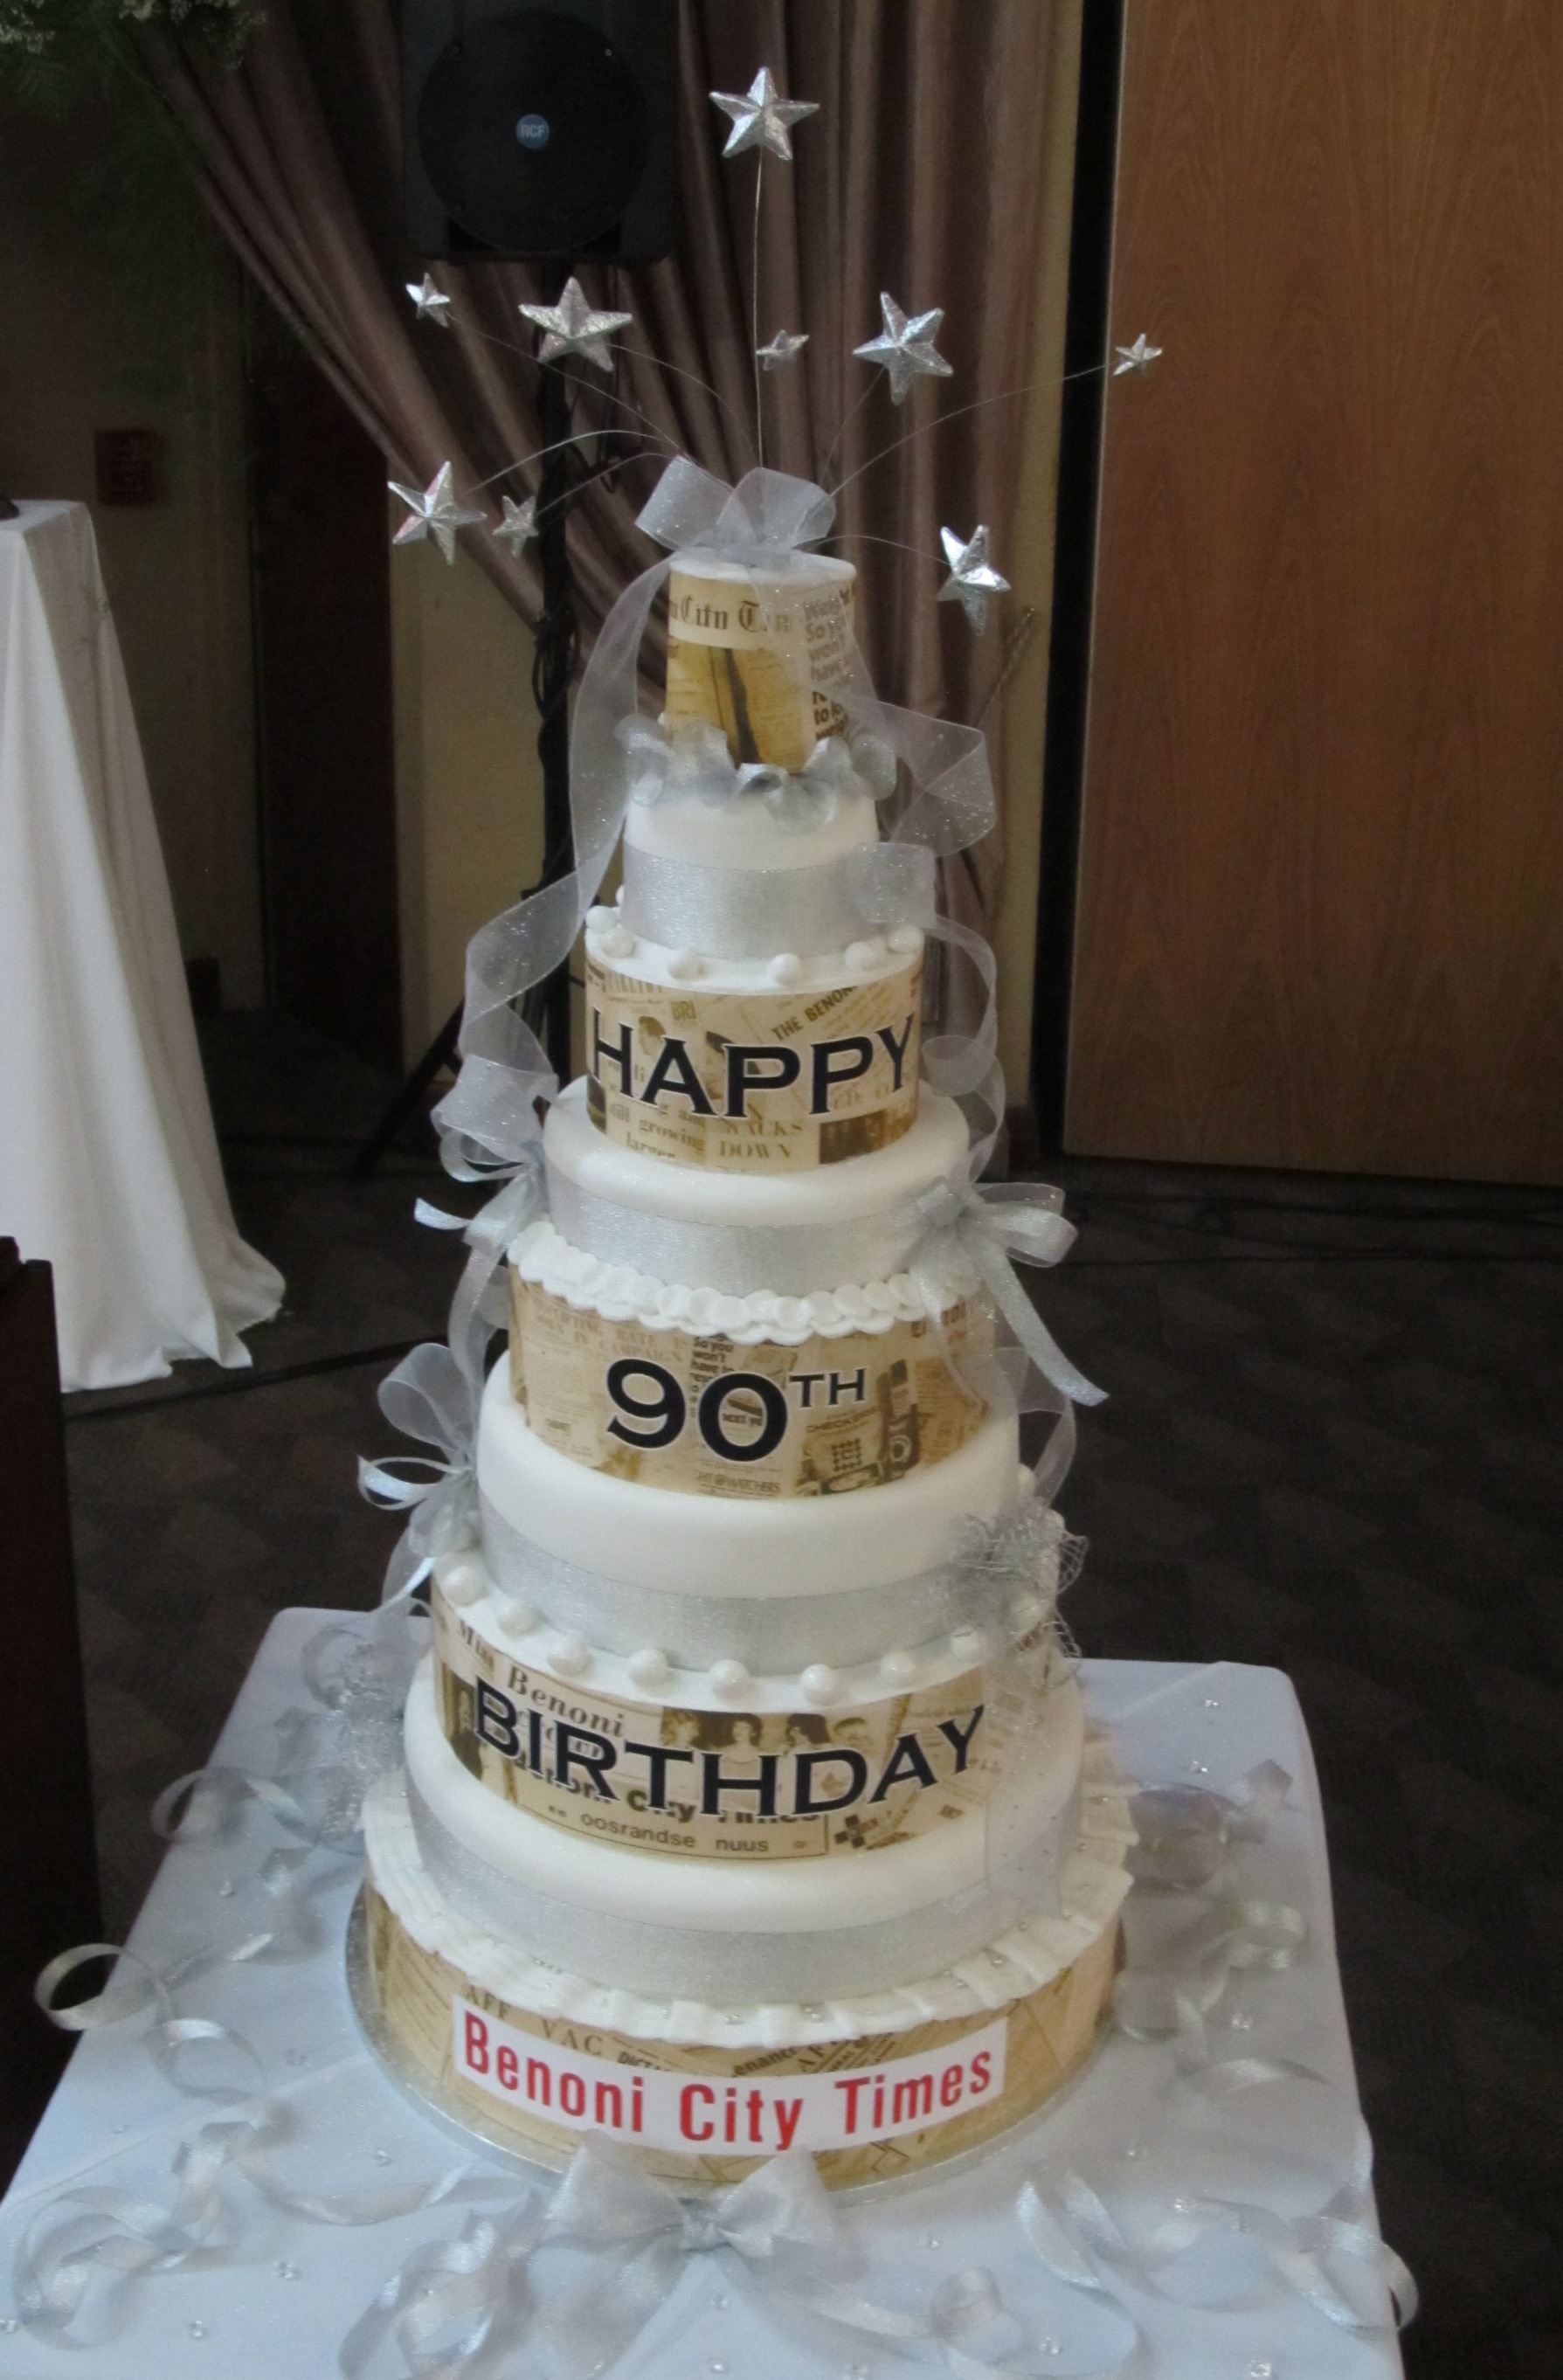 Benoni City Times- 90th Birthday Gala events- 9 tiered cake. Junior Chef Party for Nani’s 11th birthday.